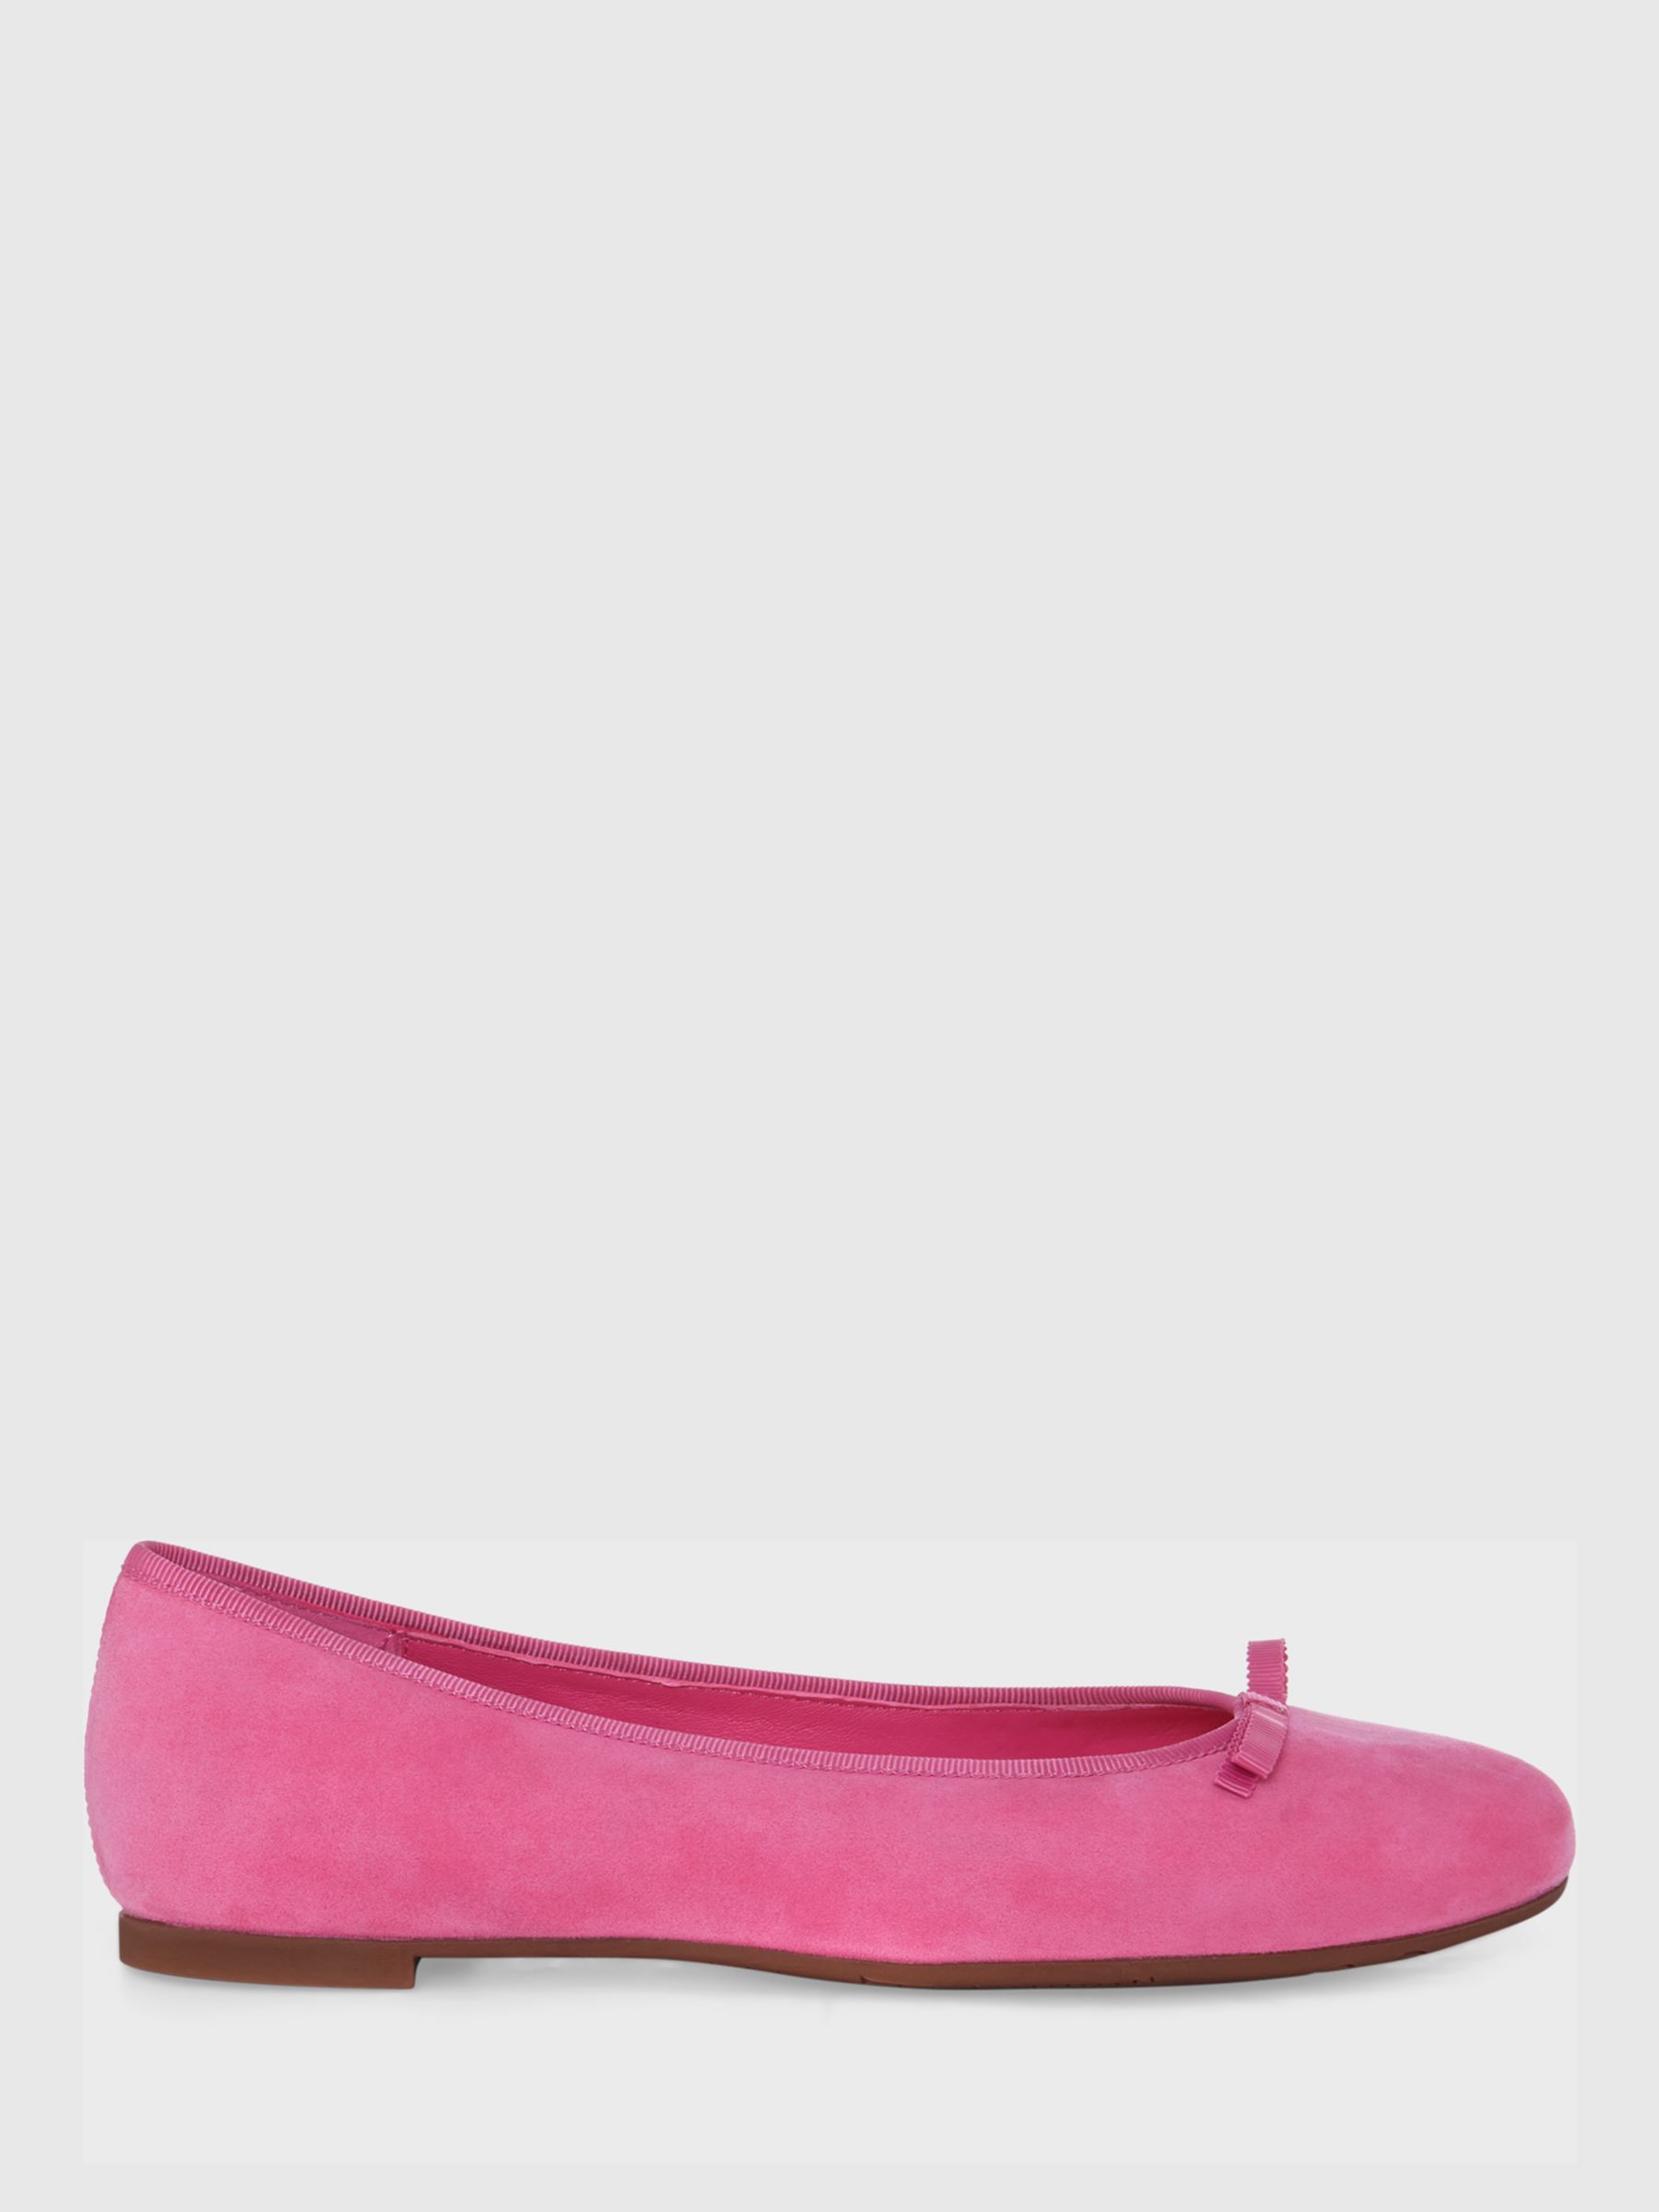 Hobbs Flo Suede Ballet Pumps, Party Pink at John Lewis & Partners